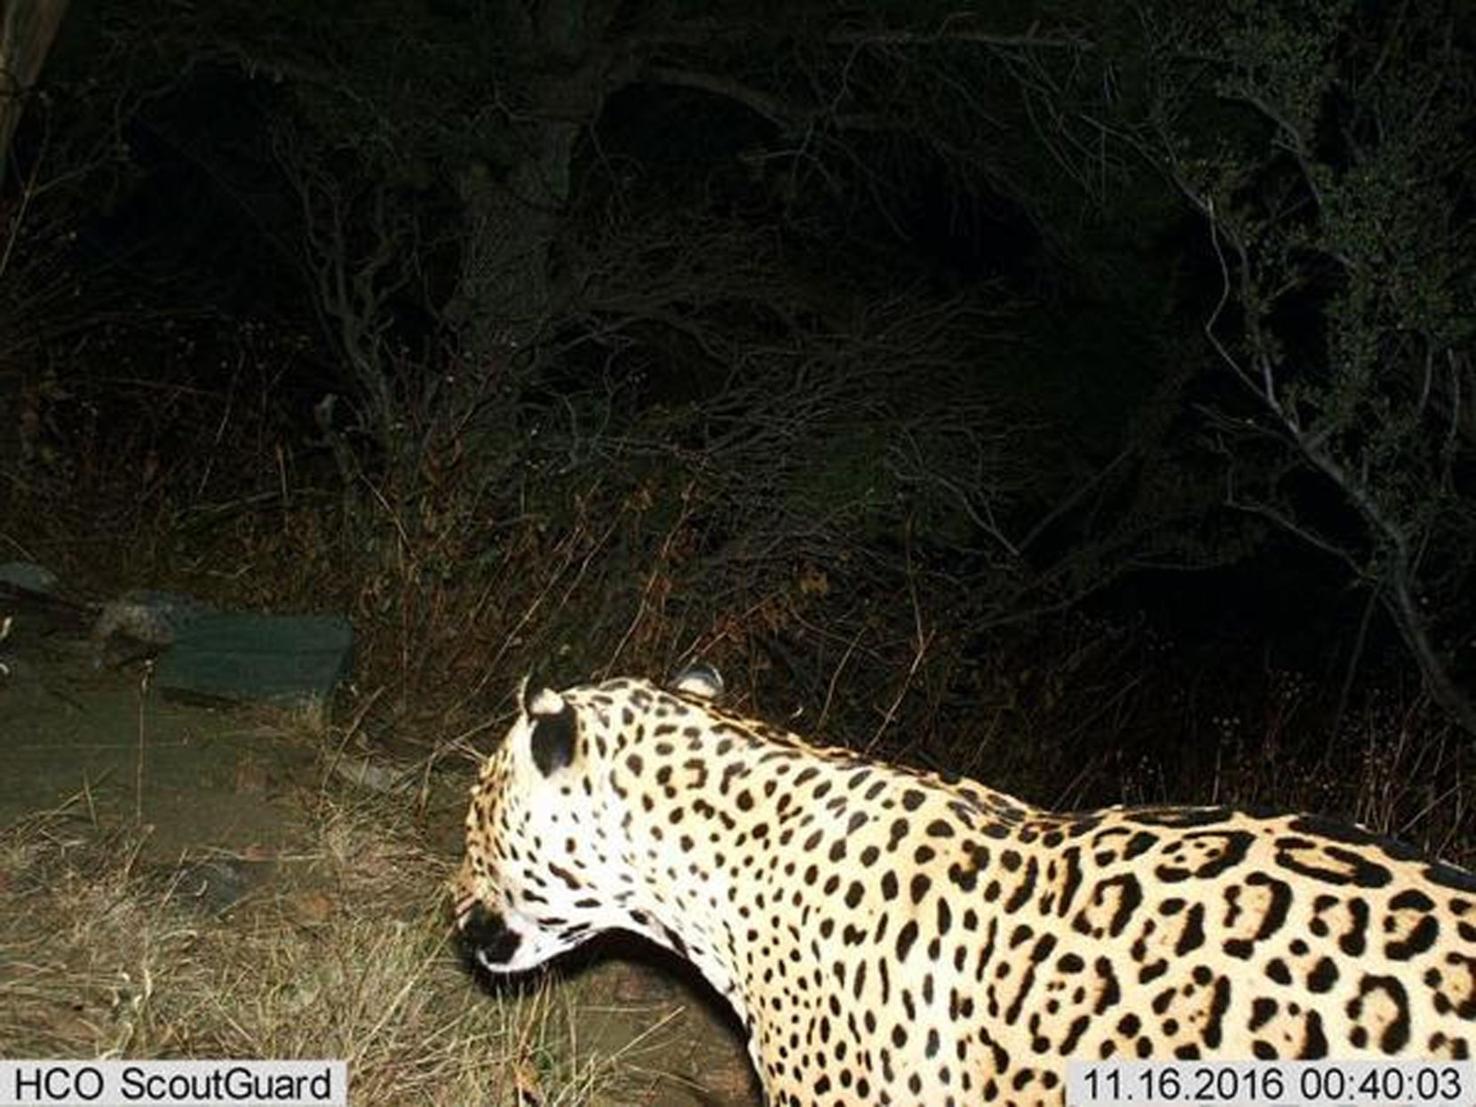 3rd jaguar spotted in southern Arizona | News | eacourier.com